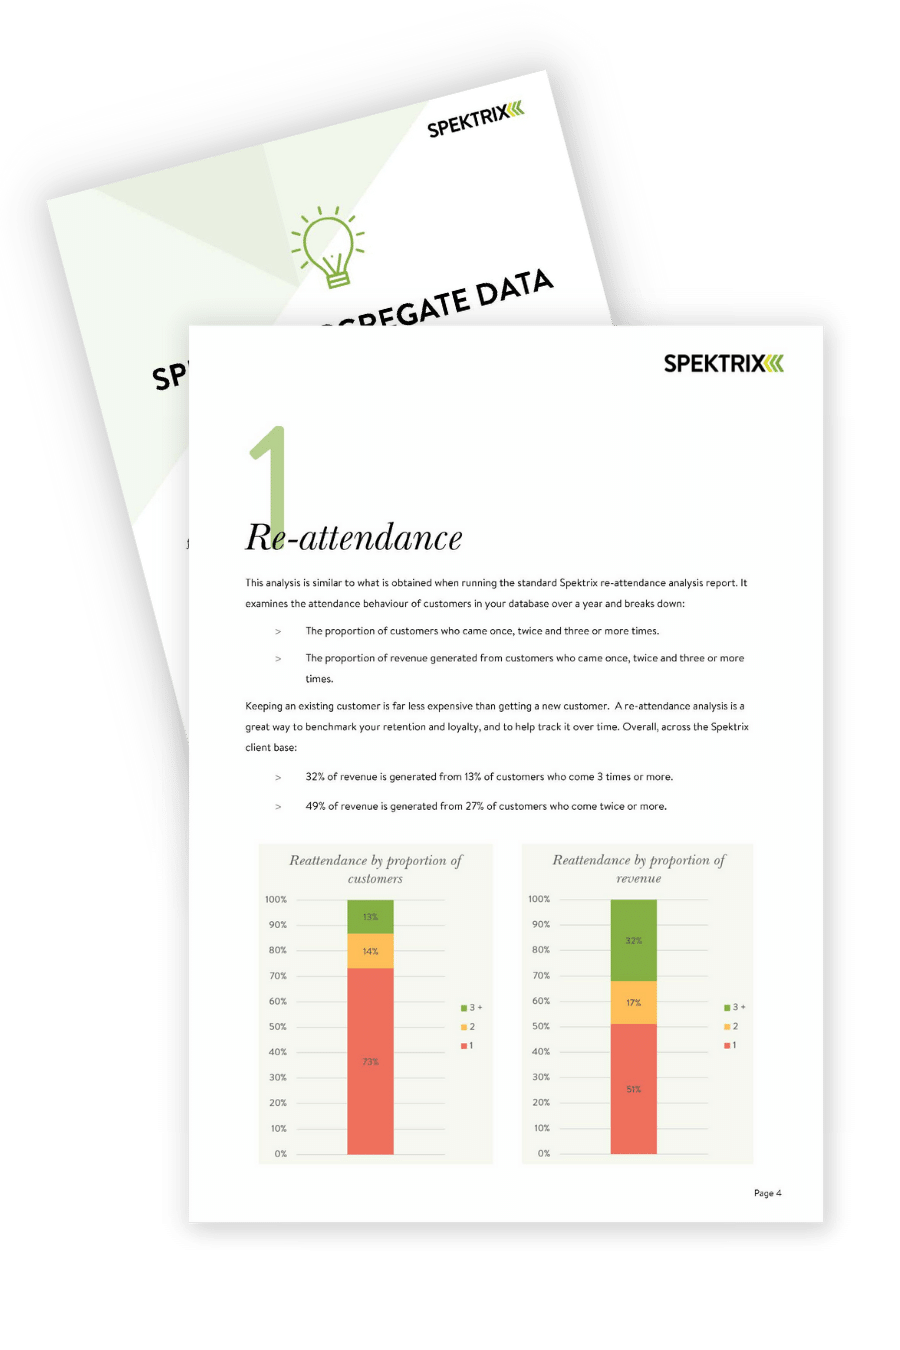 Images of Spektrix Benchmark Report showing reattendance data for 2014